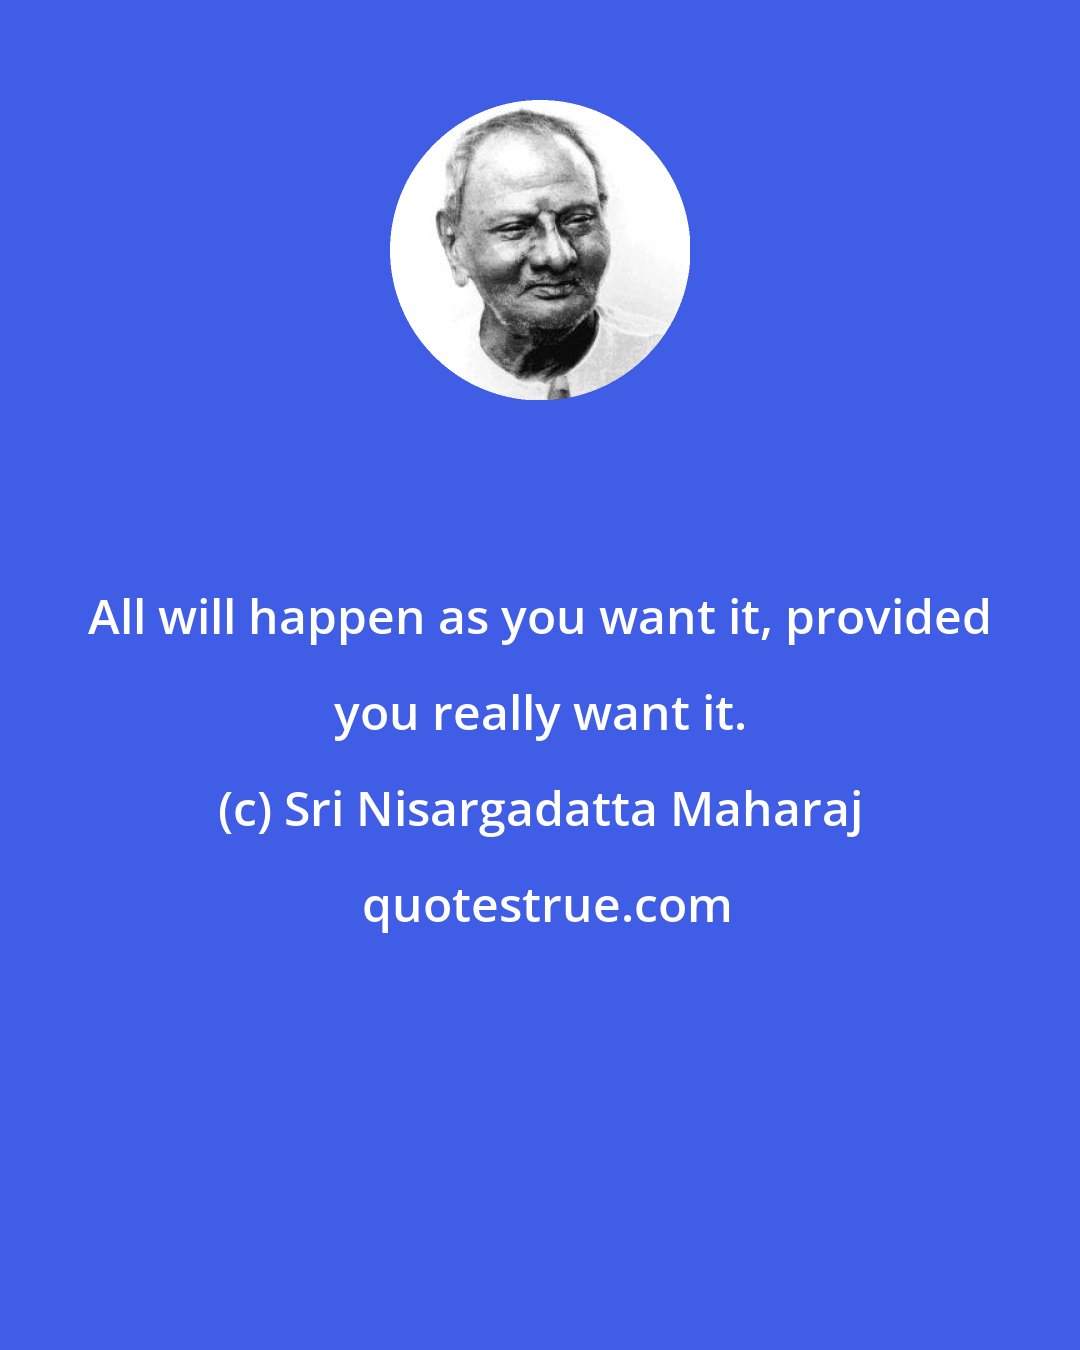 Sri Nisargadatta Maharaj: All will happen as you want it, provided you really want it.